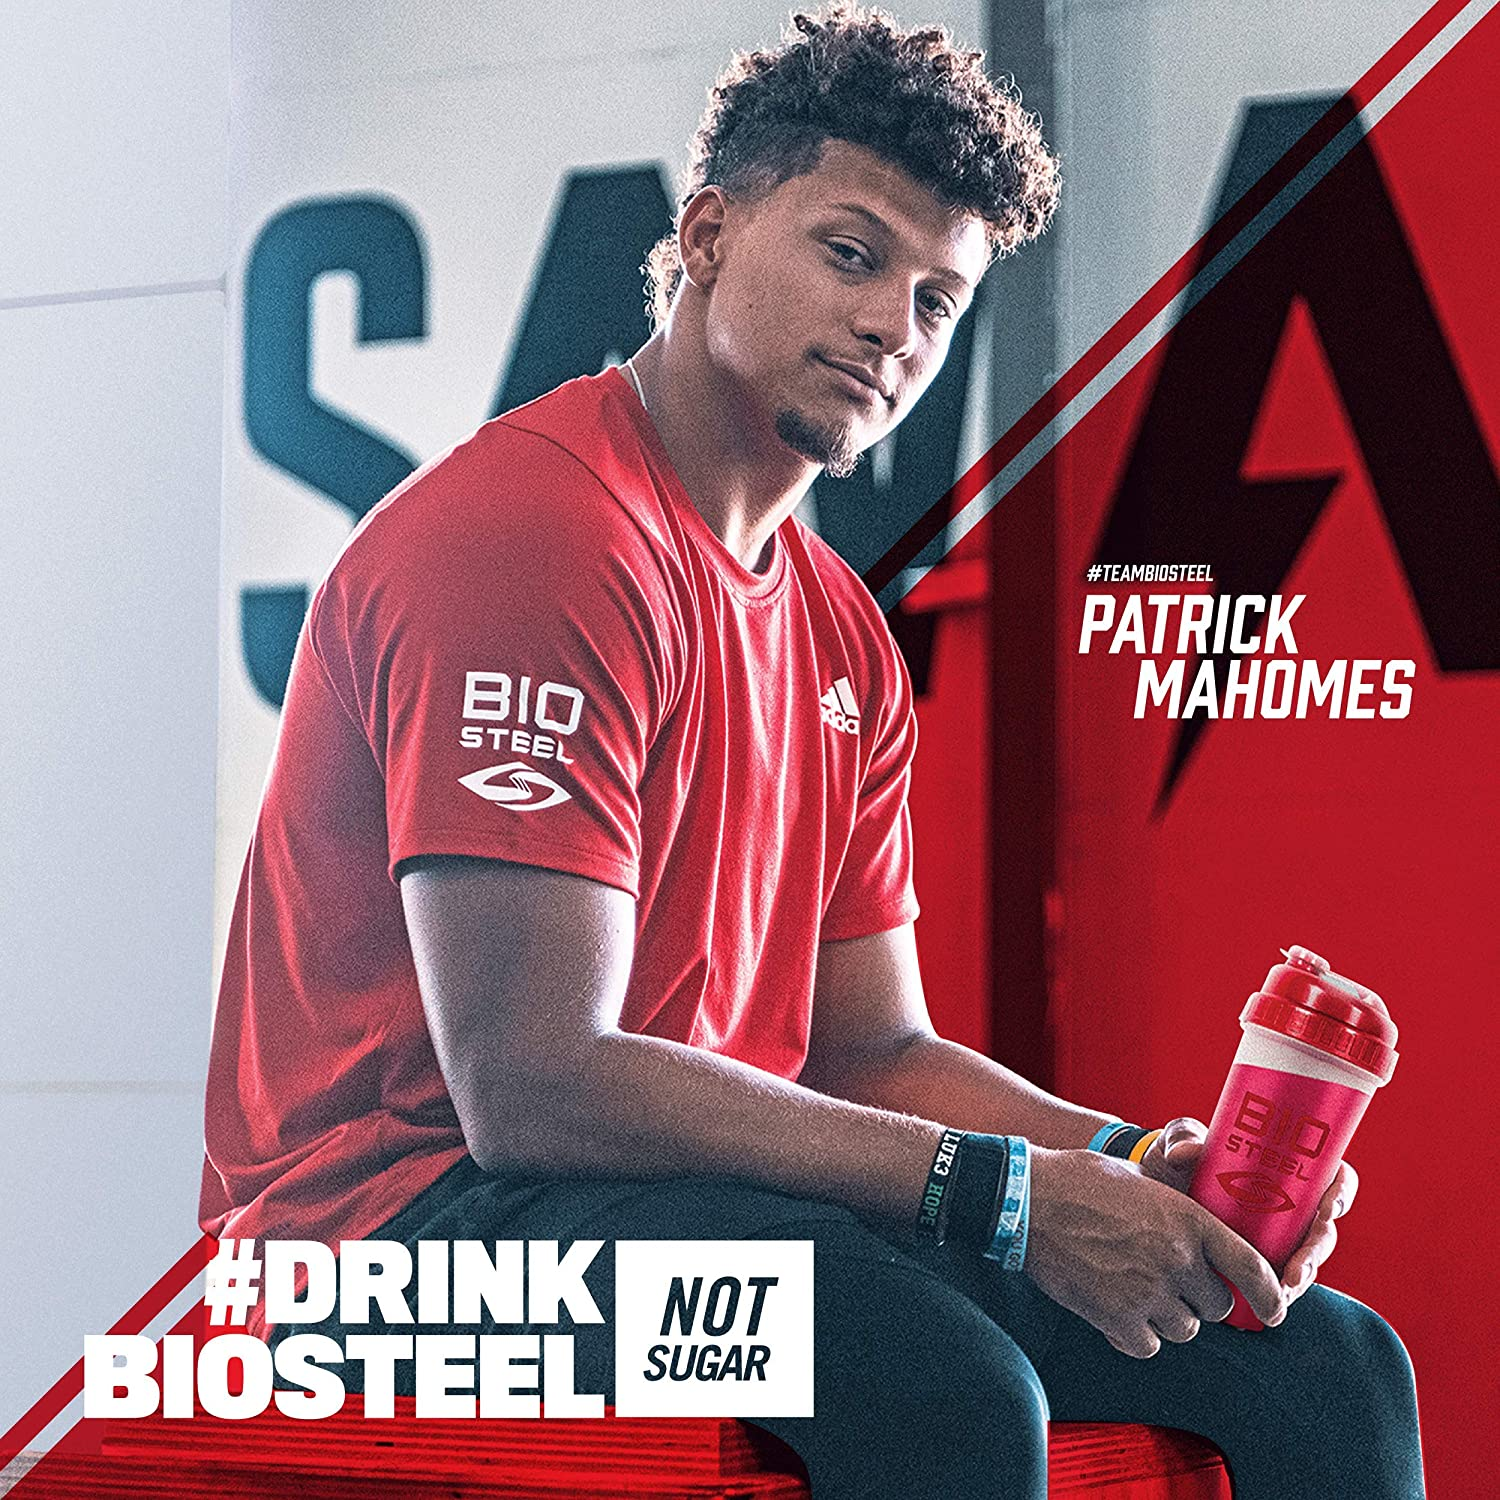 HYDRATION MIX / Watermelon - 20 Servings - by BioSteel Sports Nutrition |ProCare Outlet|